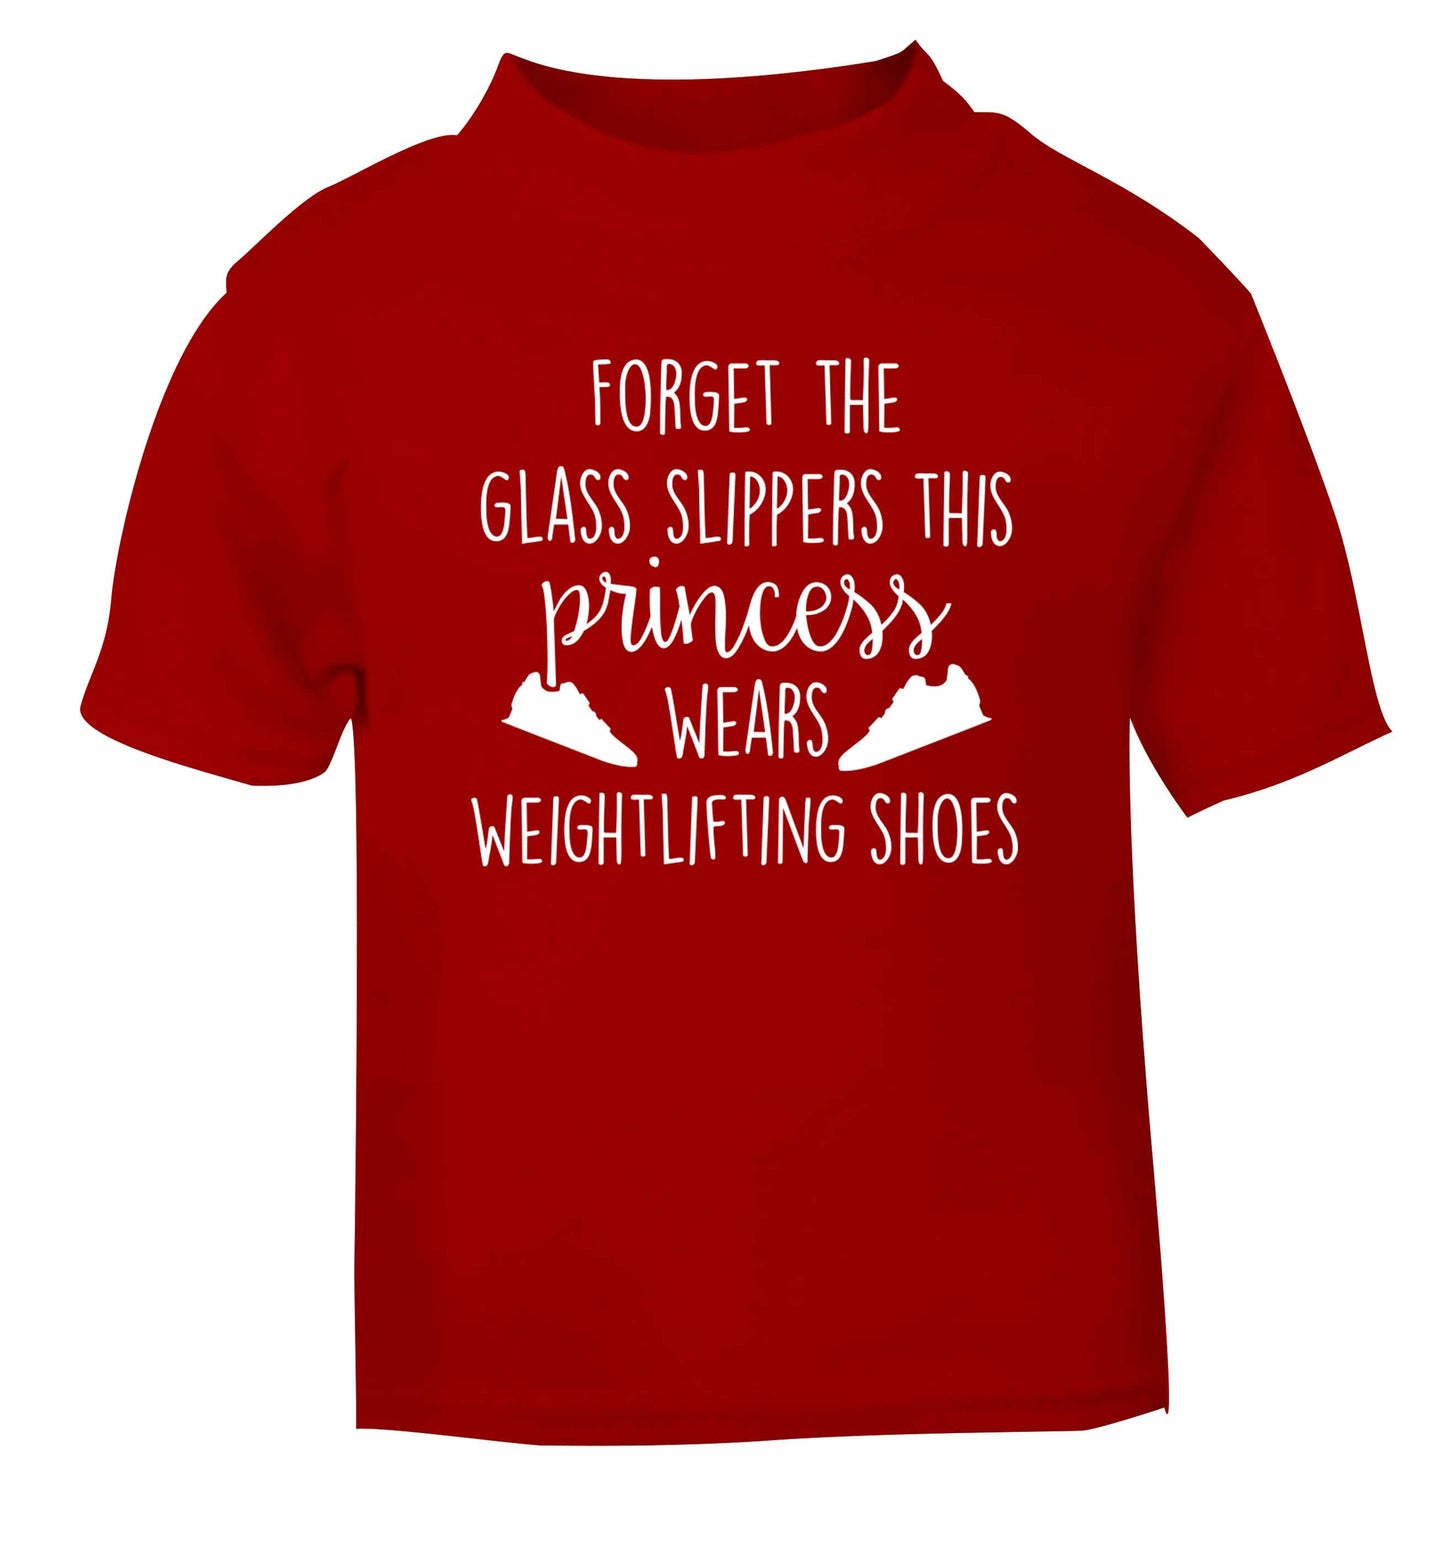 Forget the glass slippers this princess wears weightlifting shoes red Baby Toddler Tshirt 2 Years